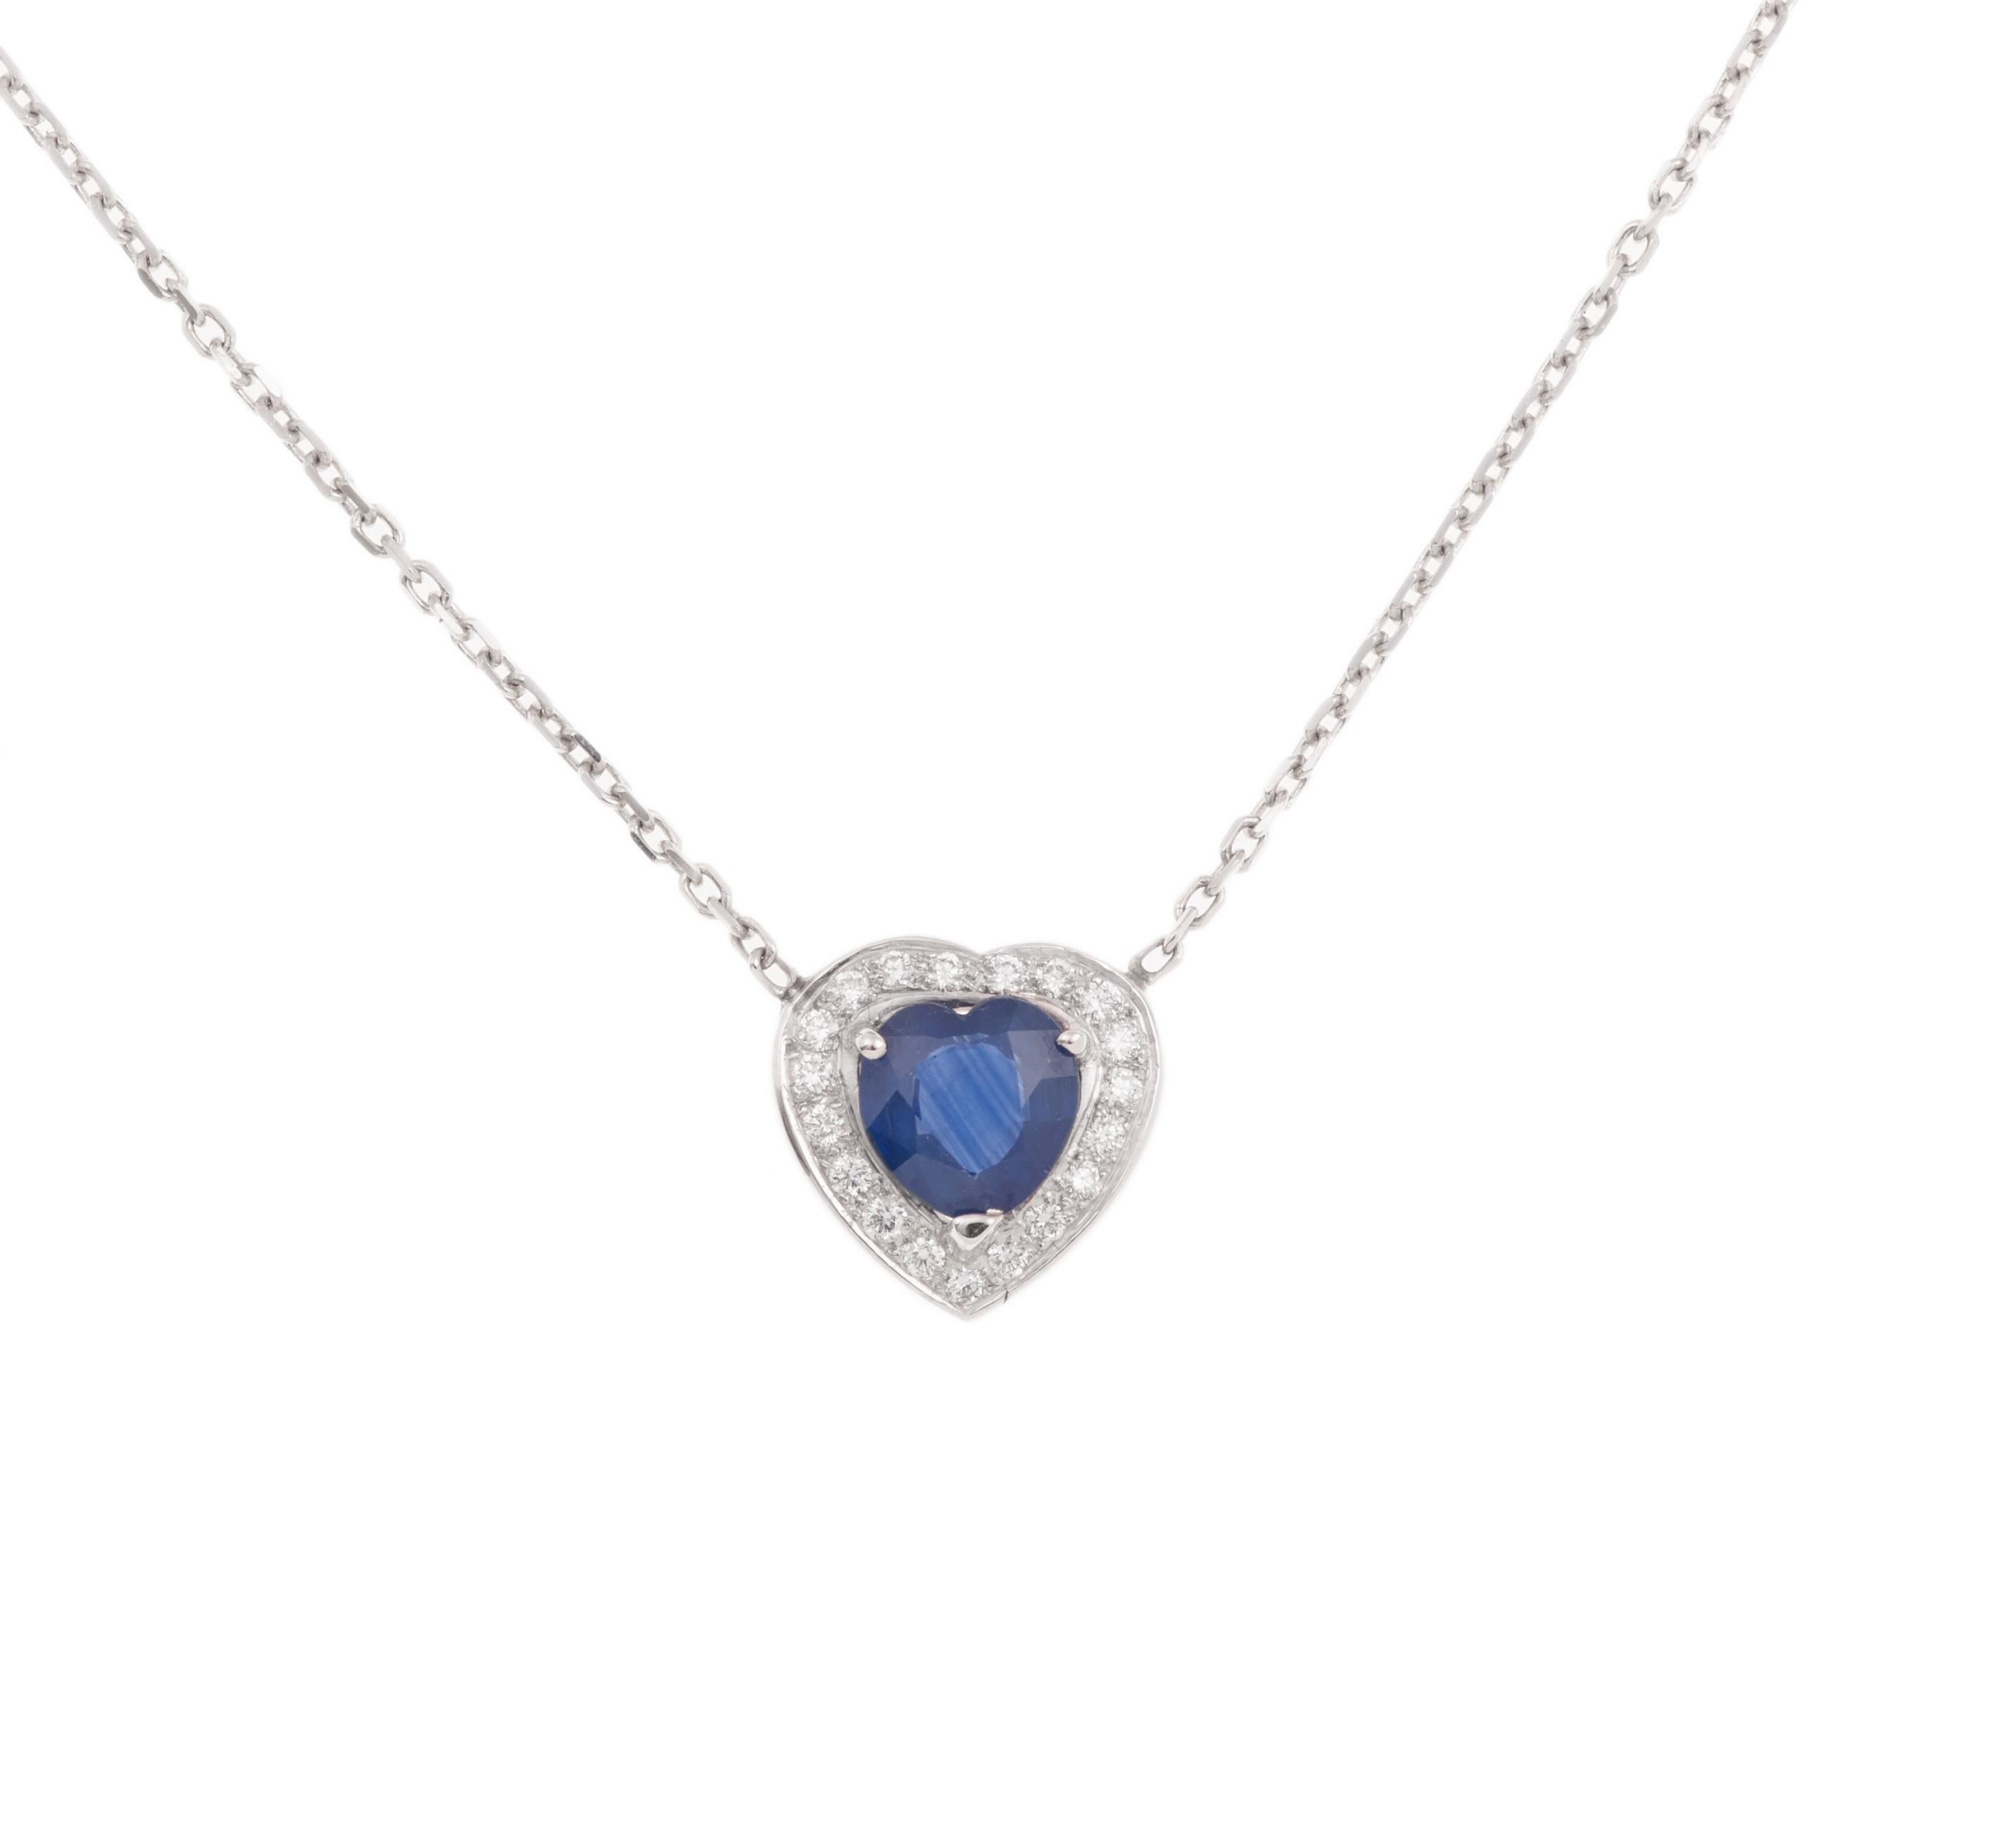 White gold necklace set with a 1.40 carat heart cut sapphire and brilliant cut diamonds

Weight of the sapphire : 1.40 carats

Total weight of diamonds: 0.20 carats

Dimensions : 1.2 x 1.2 x 0.45 cm (0.475 x 0.475 x 0.180 inch)

Length of the chain: